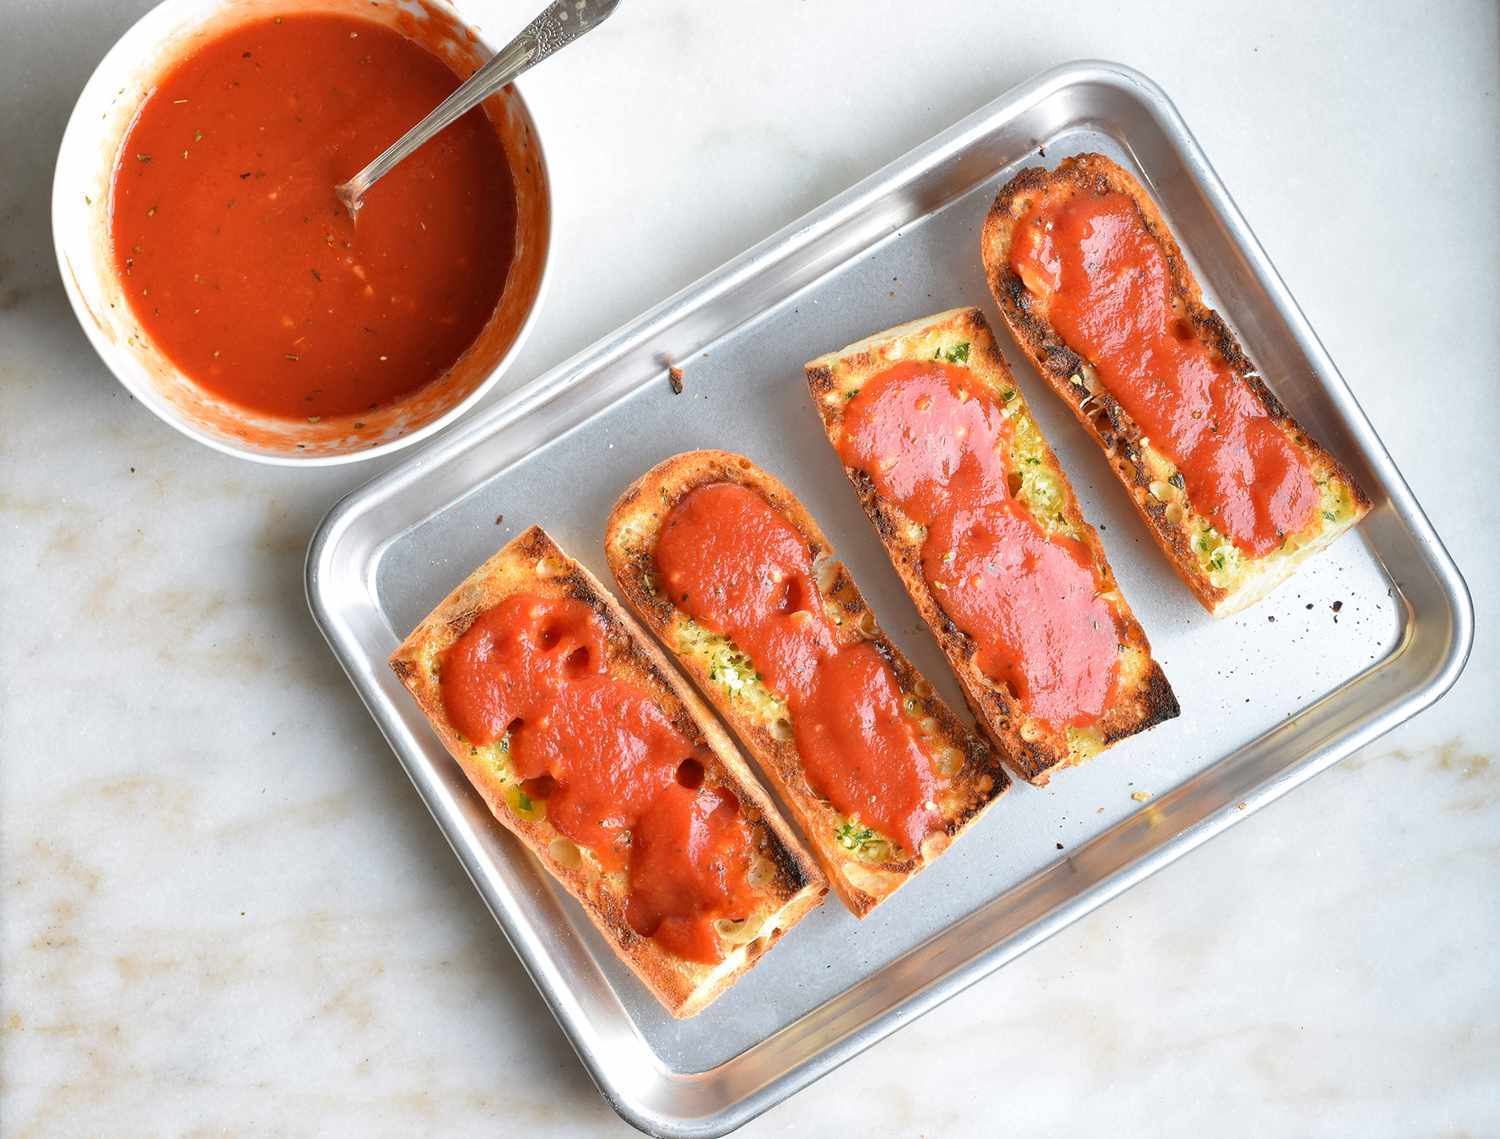 french bread covered in pizza sauce on a tray